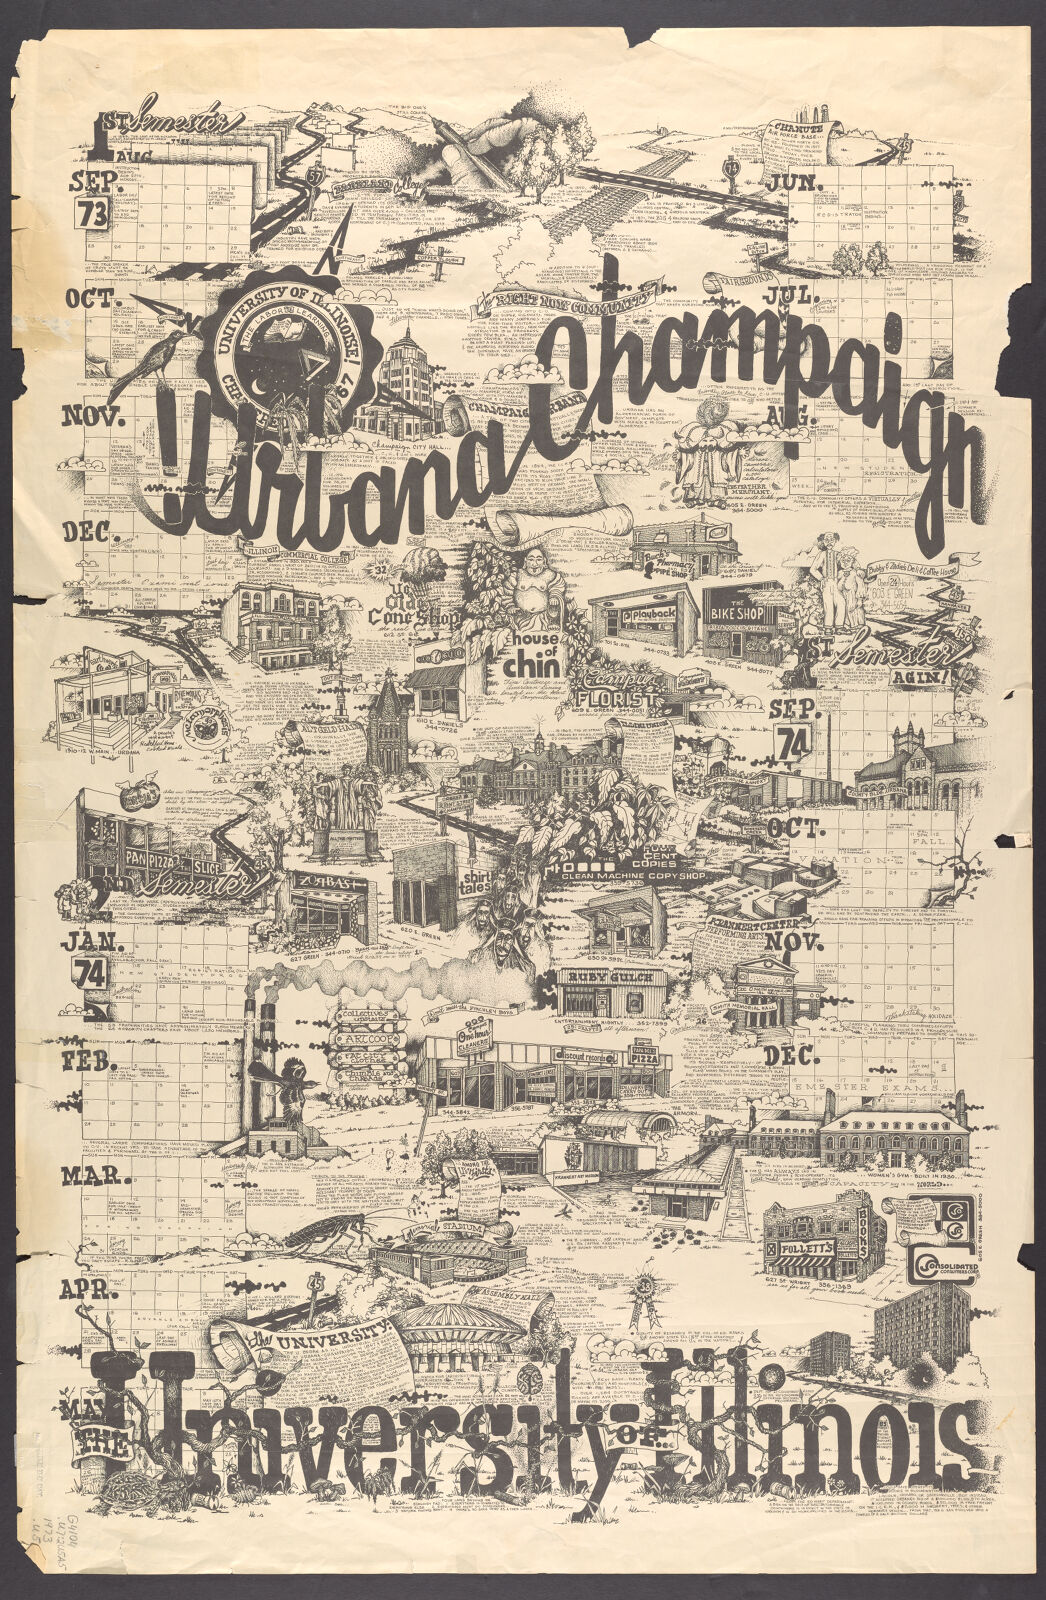 Calendar Map, 1974 Digital Collections at the University of Illinois